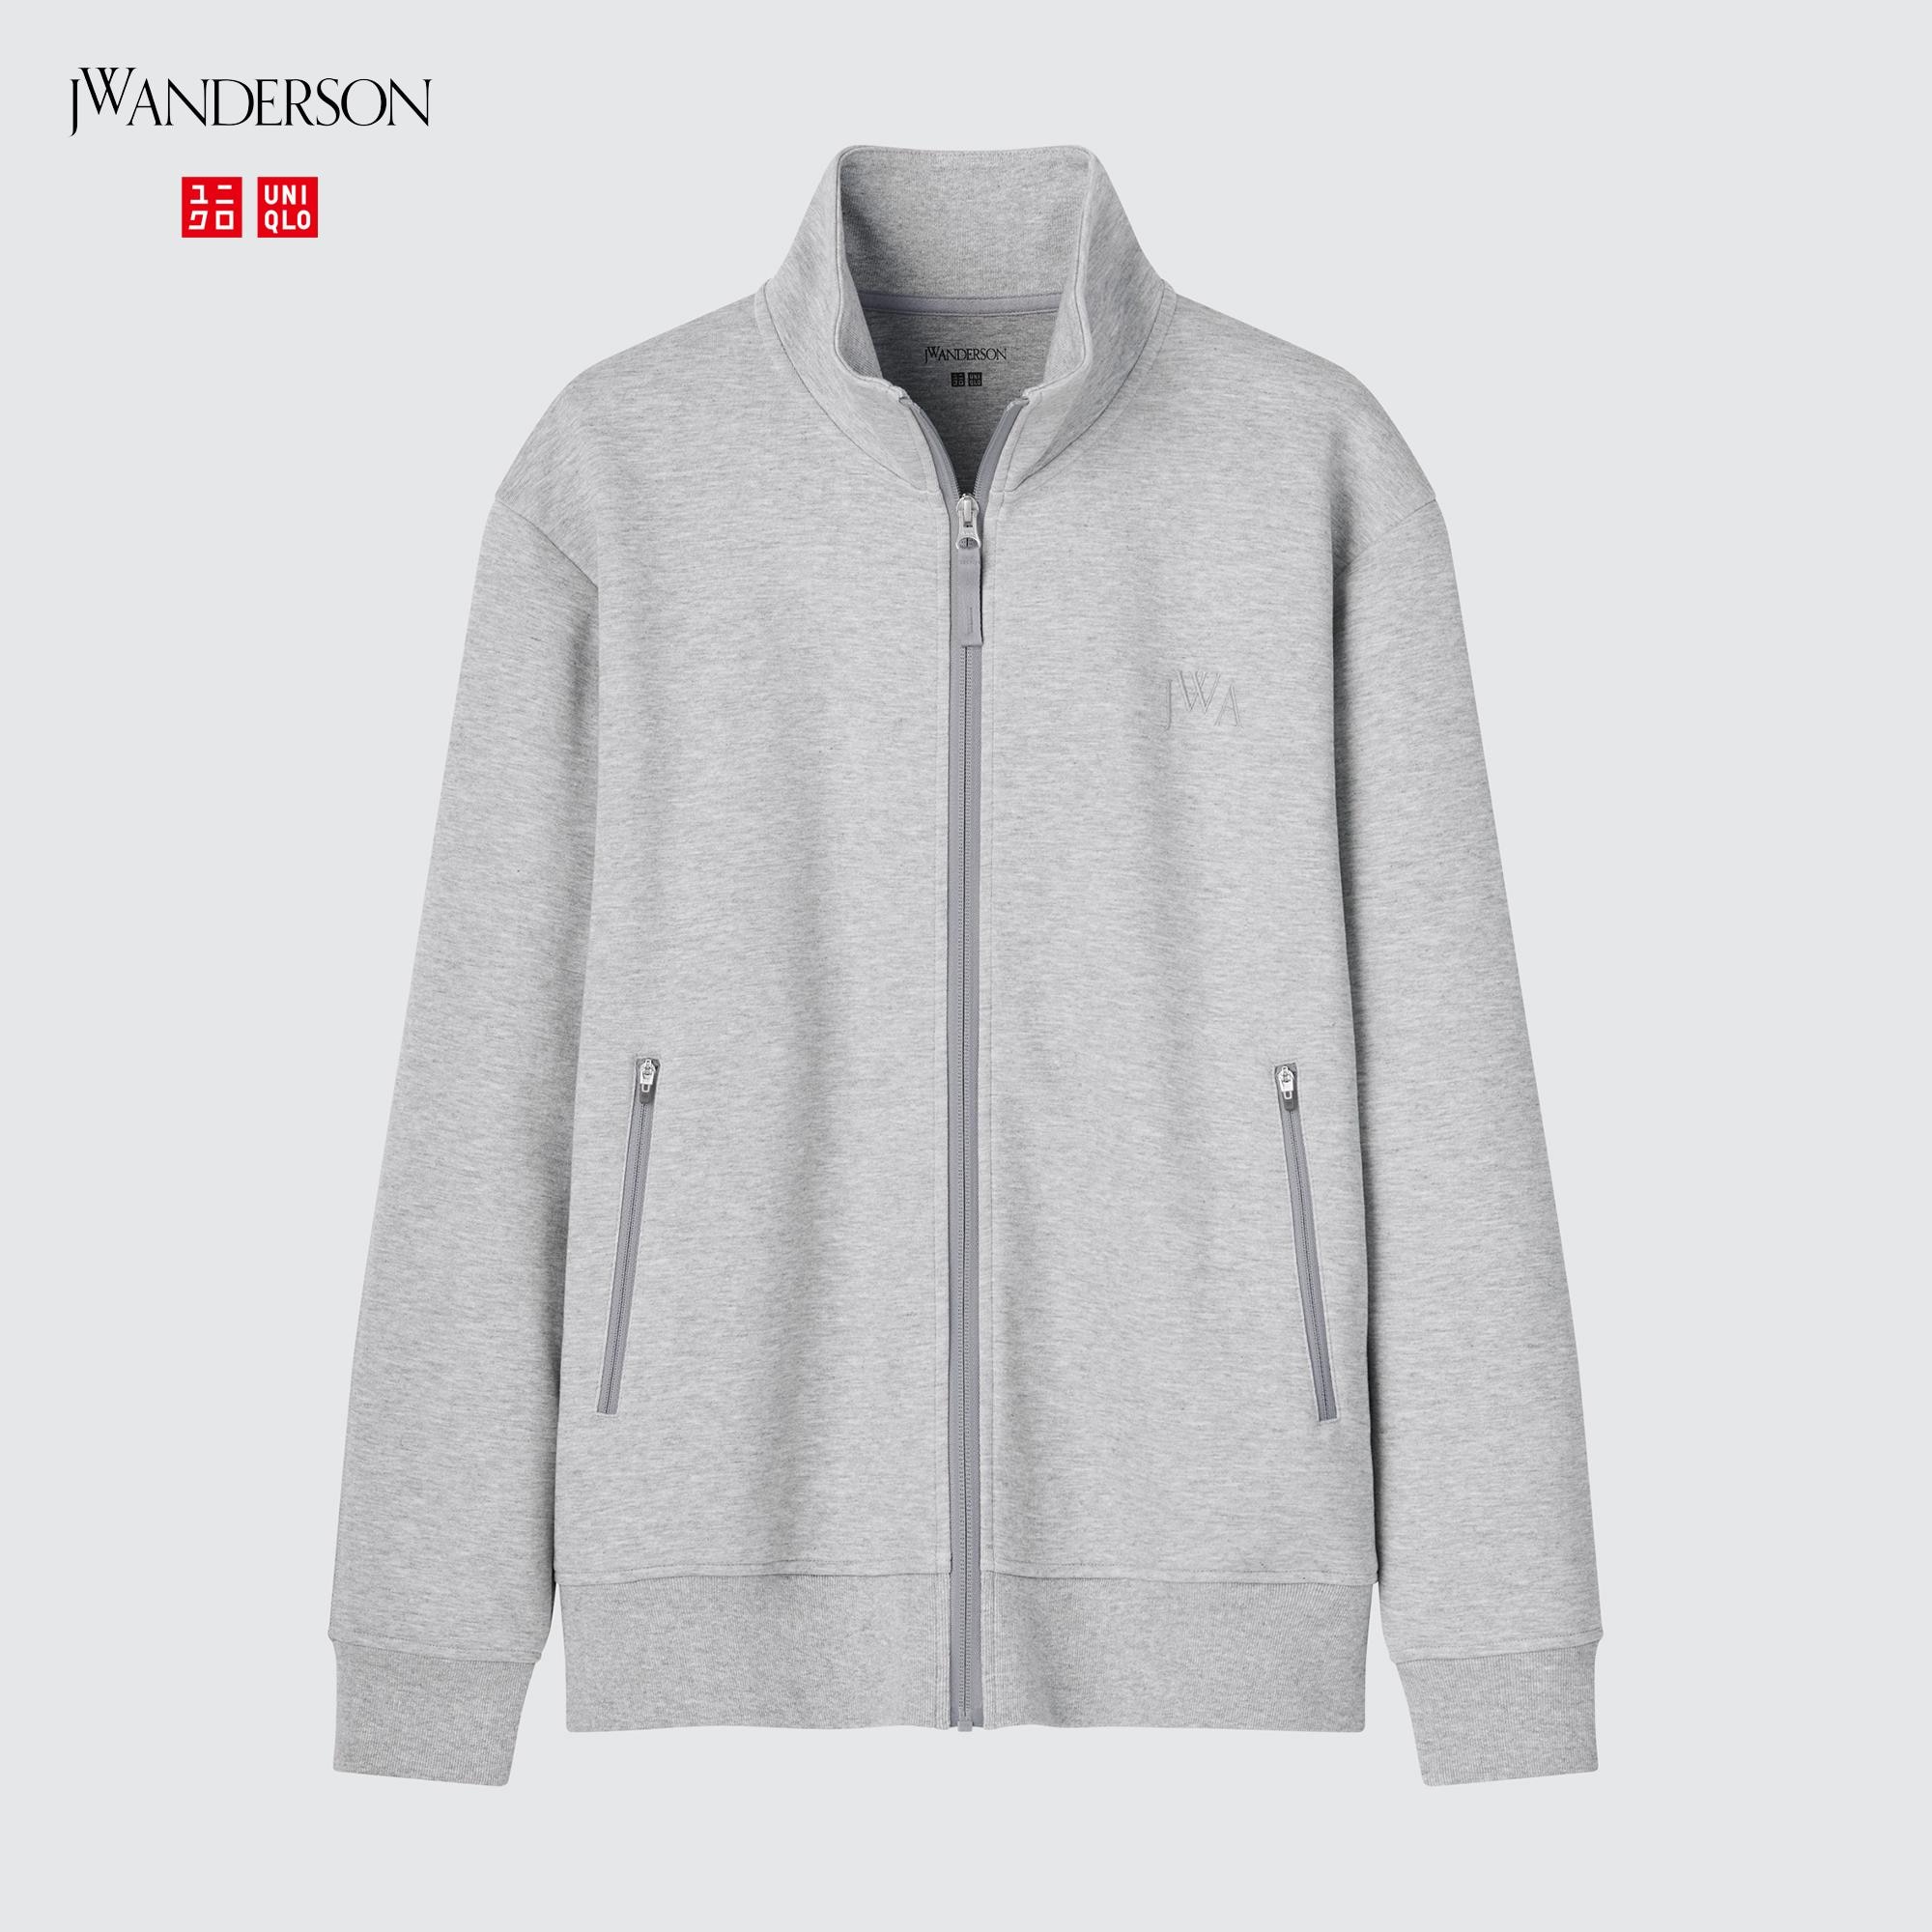 Check styling ideas for「Track Jacket JW Anderson、Track Pants JW